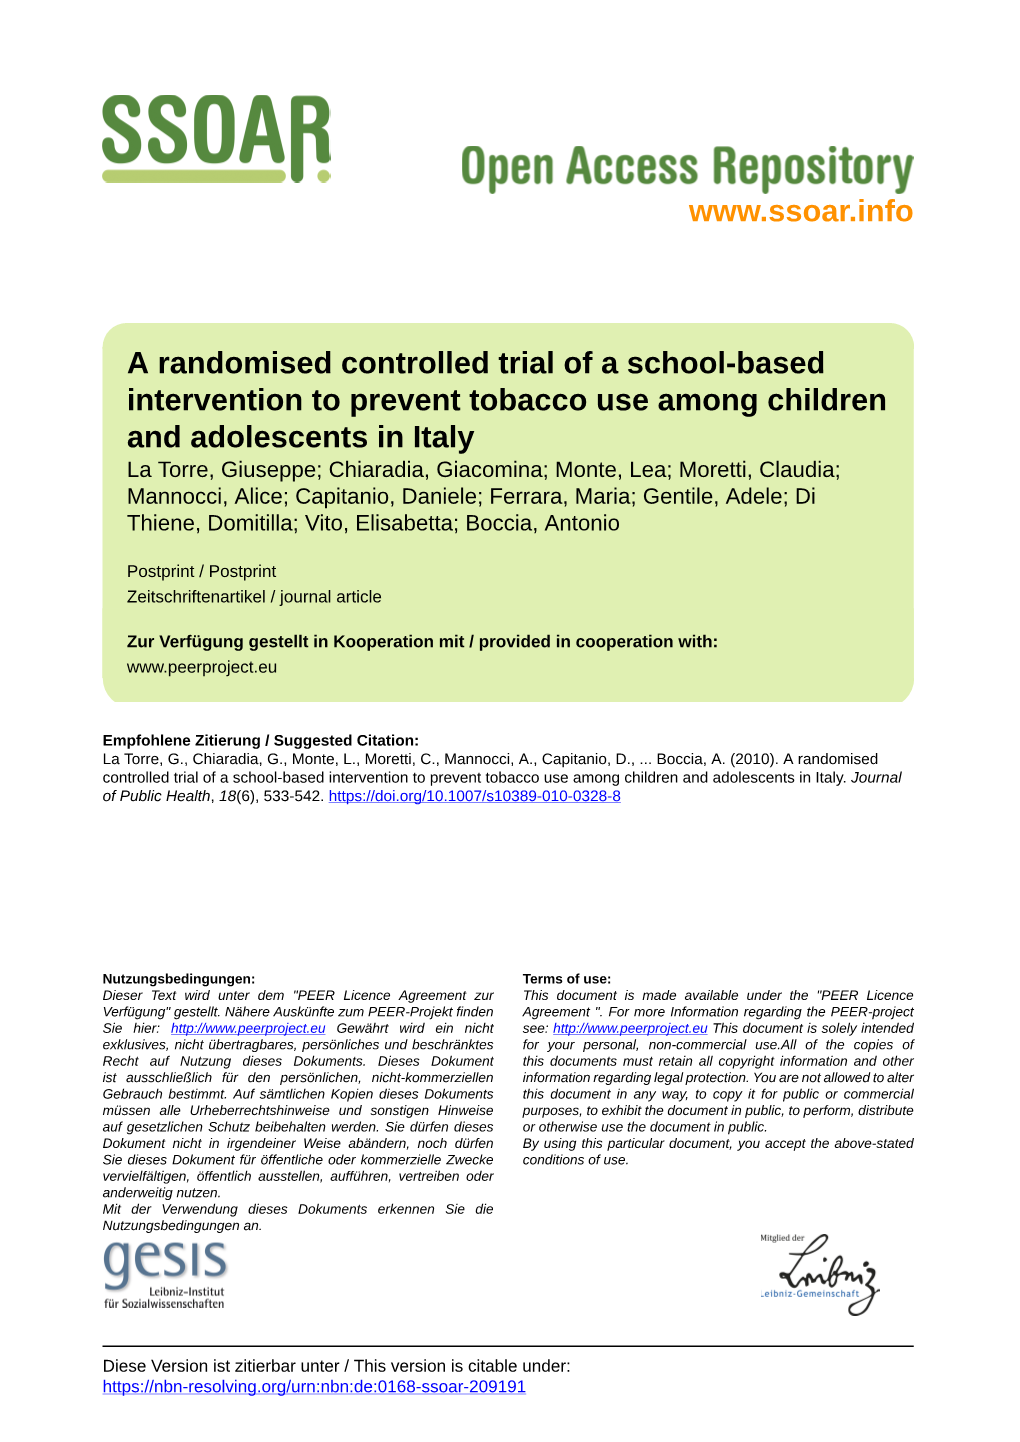 A Randomised Controlled Trial of a School-Based Intervention to Prevent Tobacco Use Among Children and Adolescents in Italy